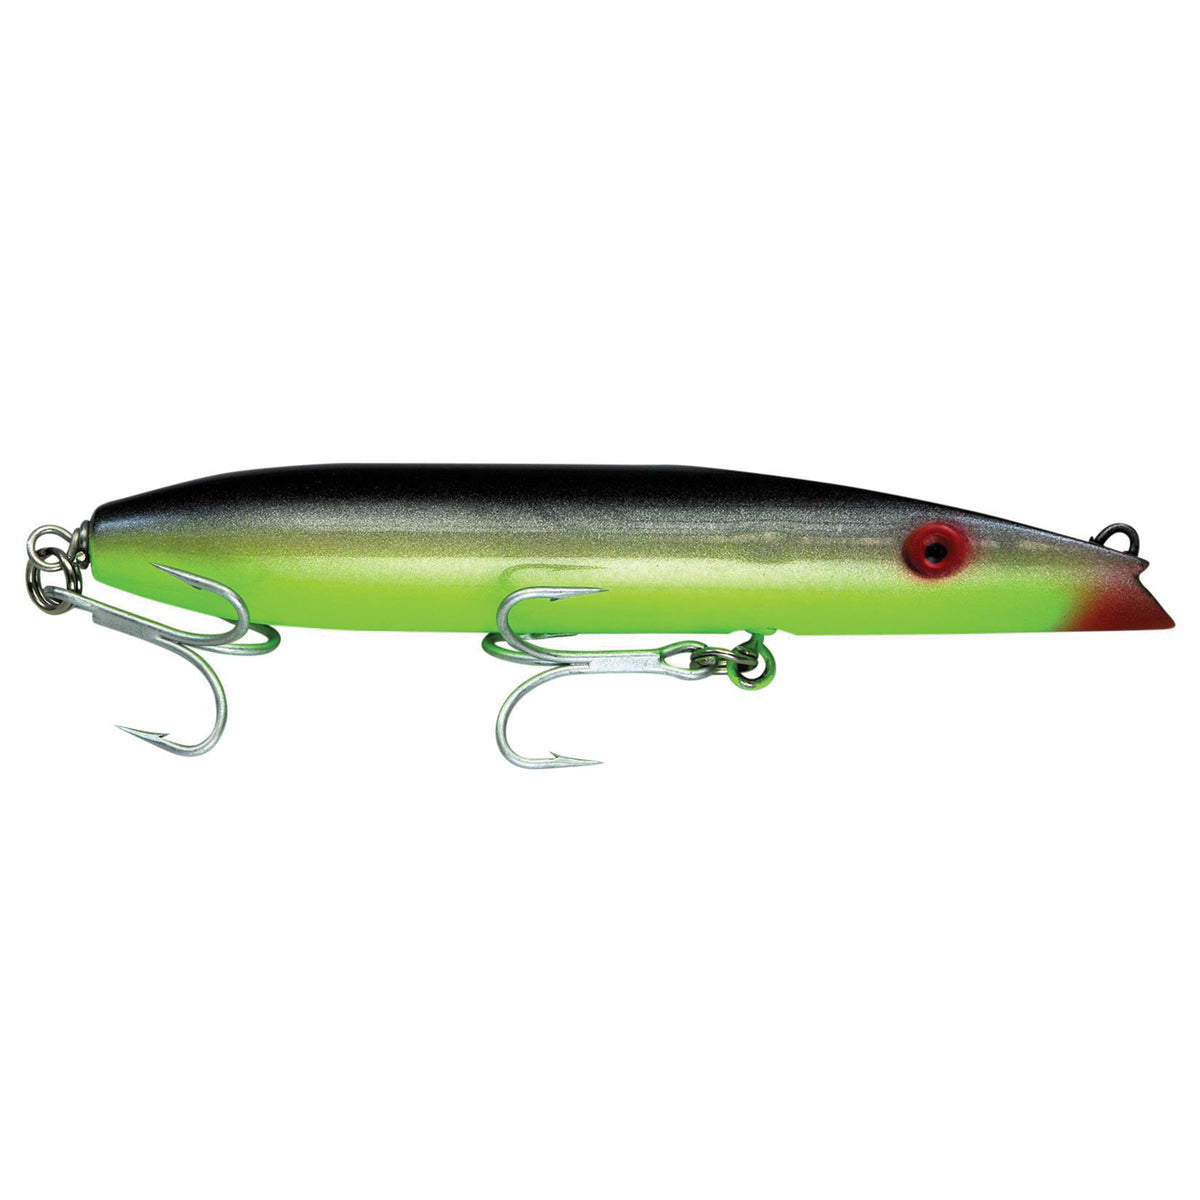 Power Pro Braided Spectra Line Moss Green – J&B Tackle Co